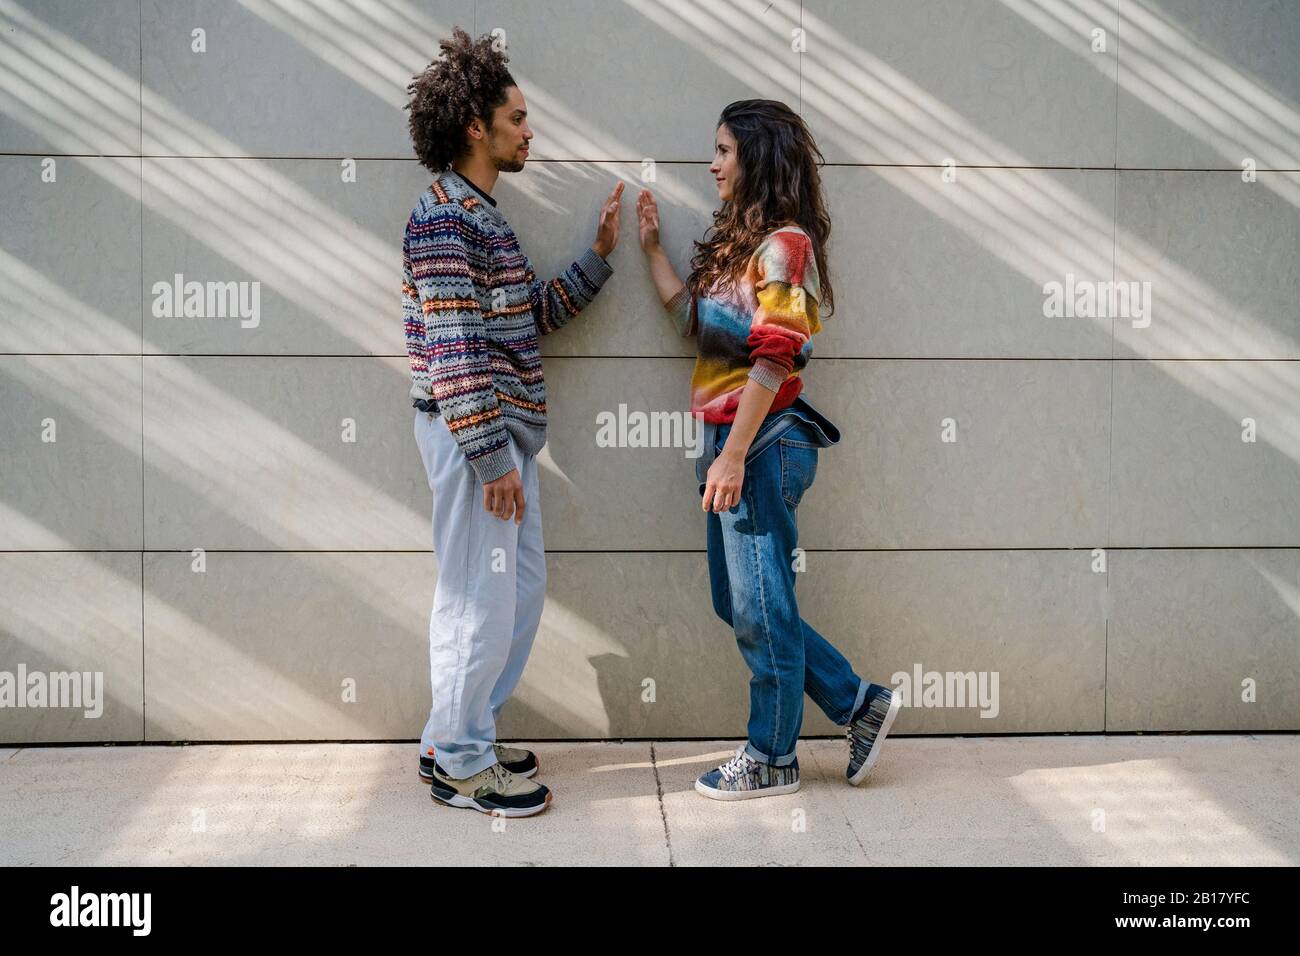 Couple of dancers face to face in front of a wall Stock Photo